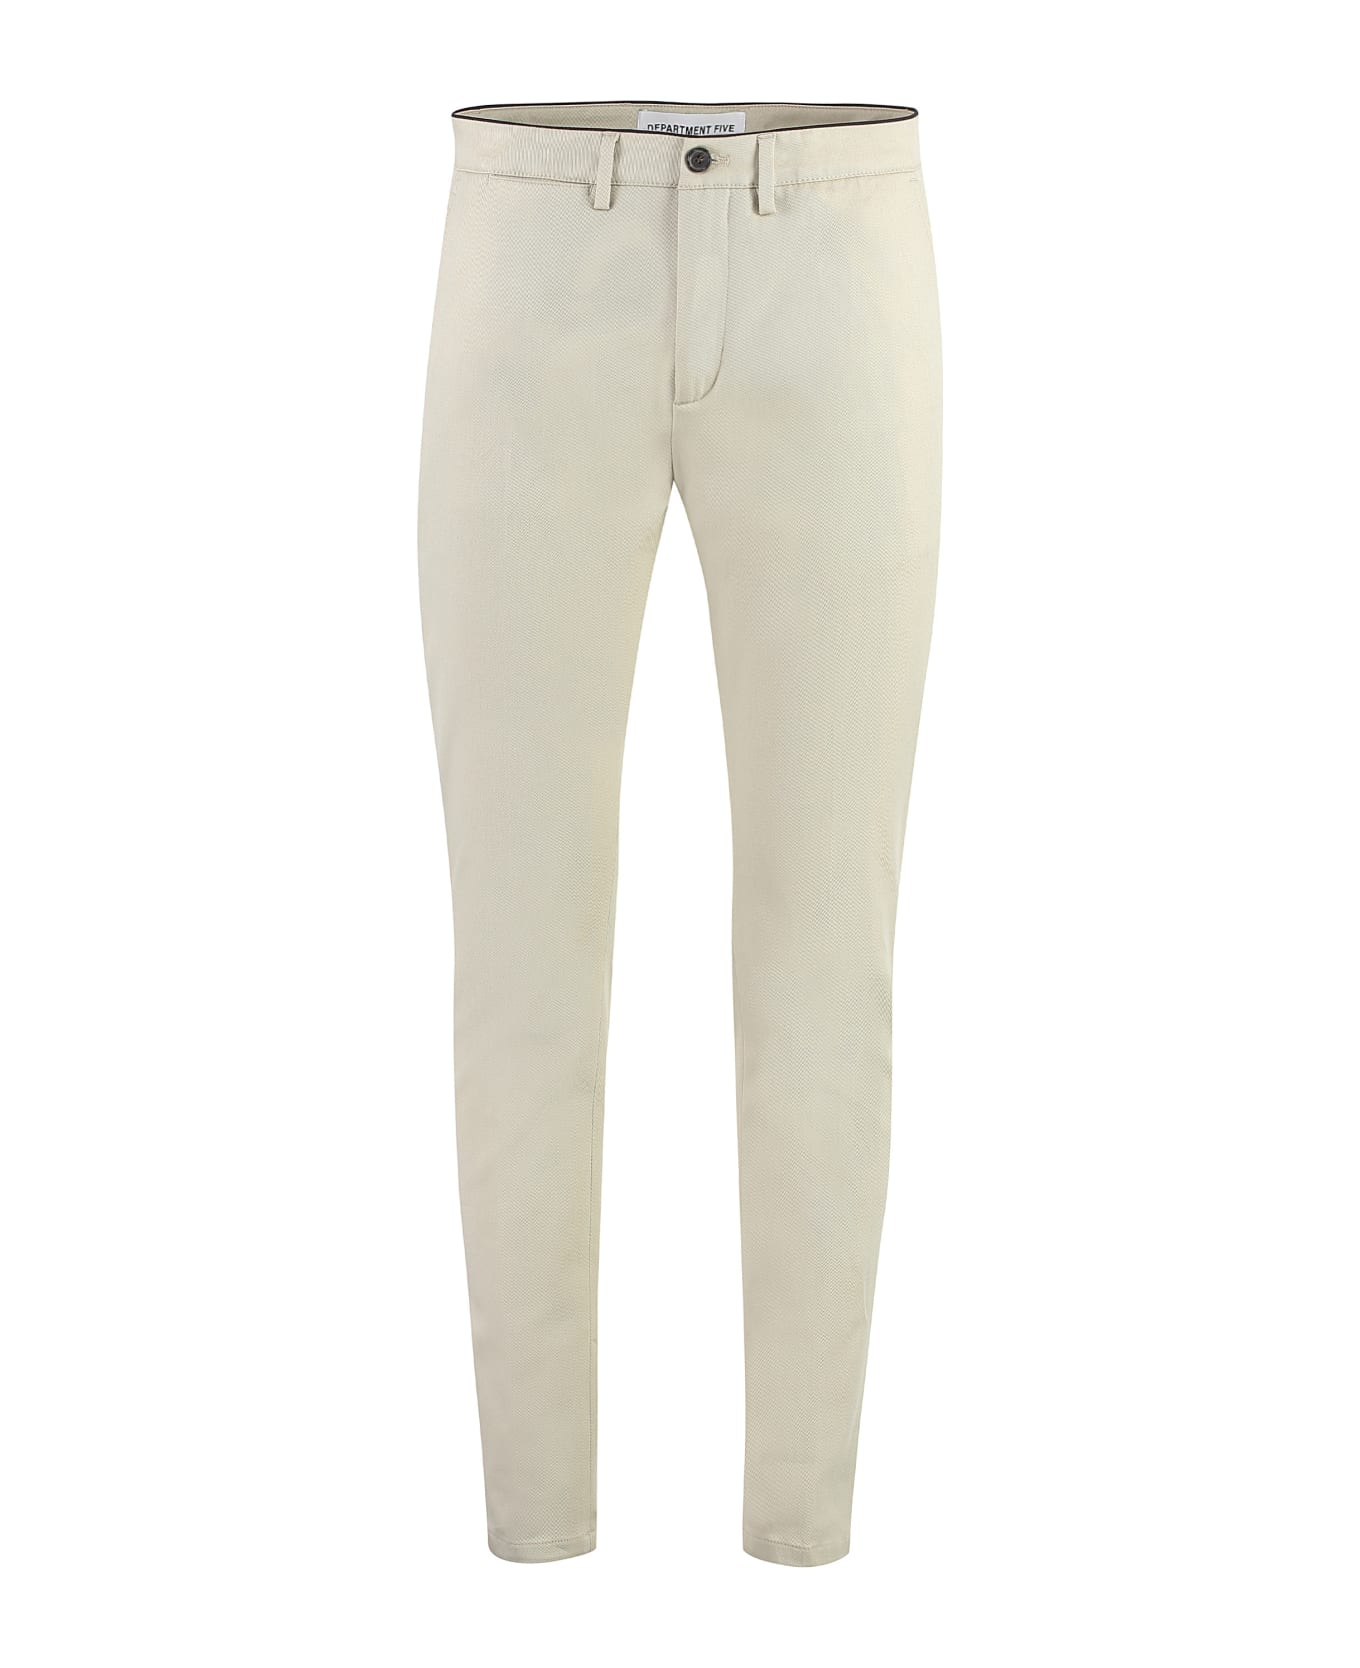 Department Five Mike Chino Trousers - Sand